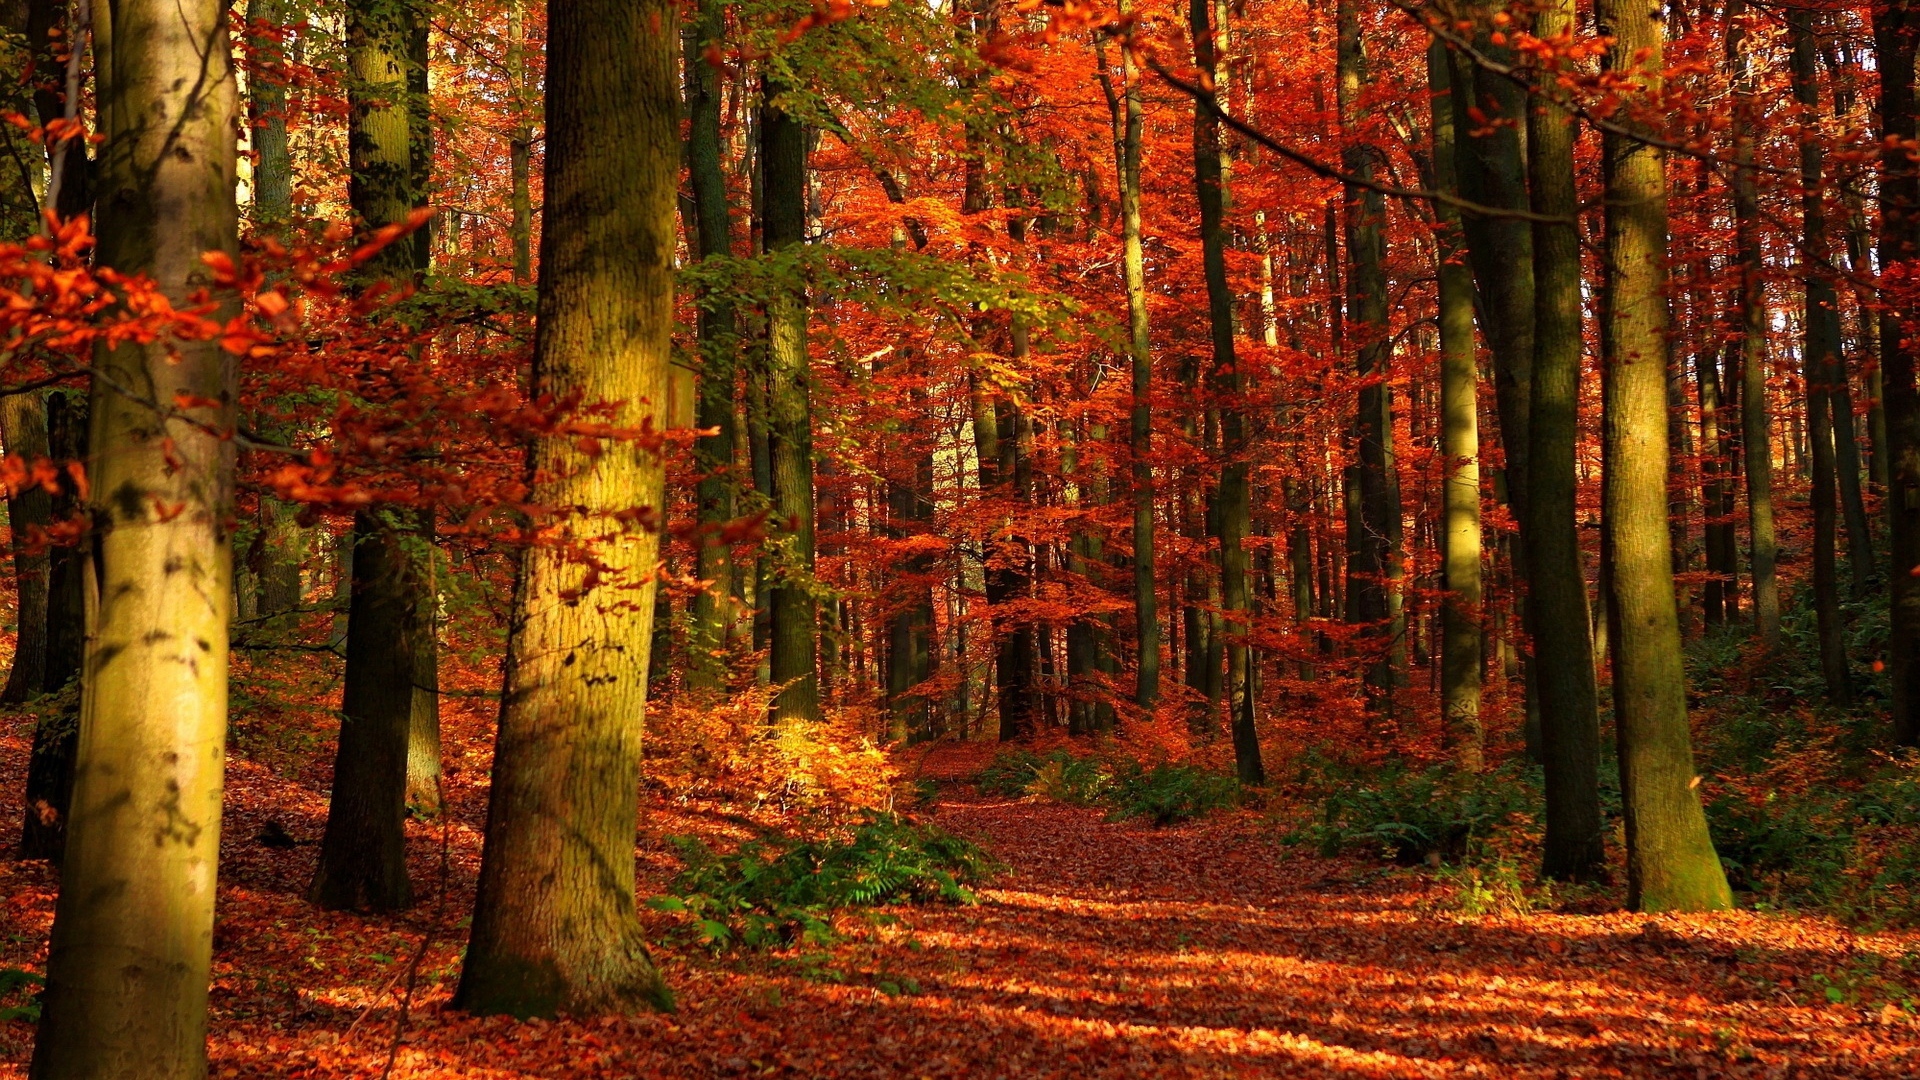 Download wallpaper 1920x1080 autumn, wood, leaves, trees